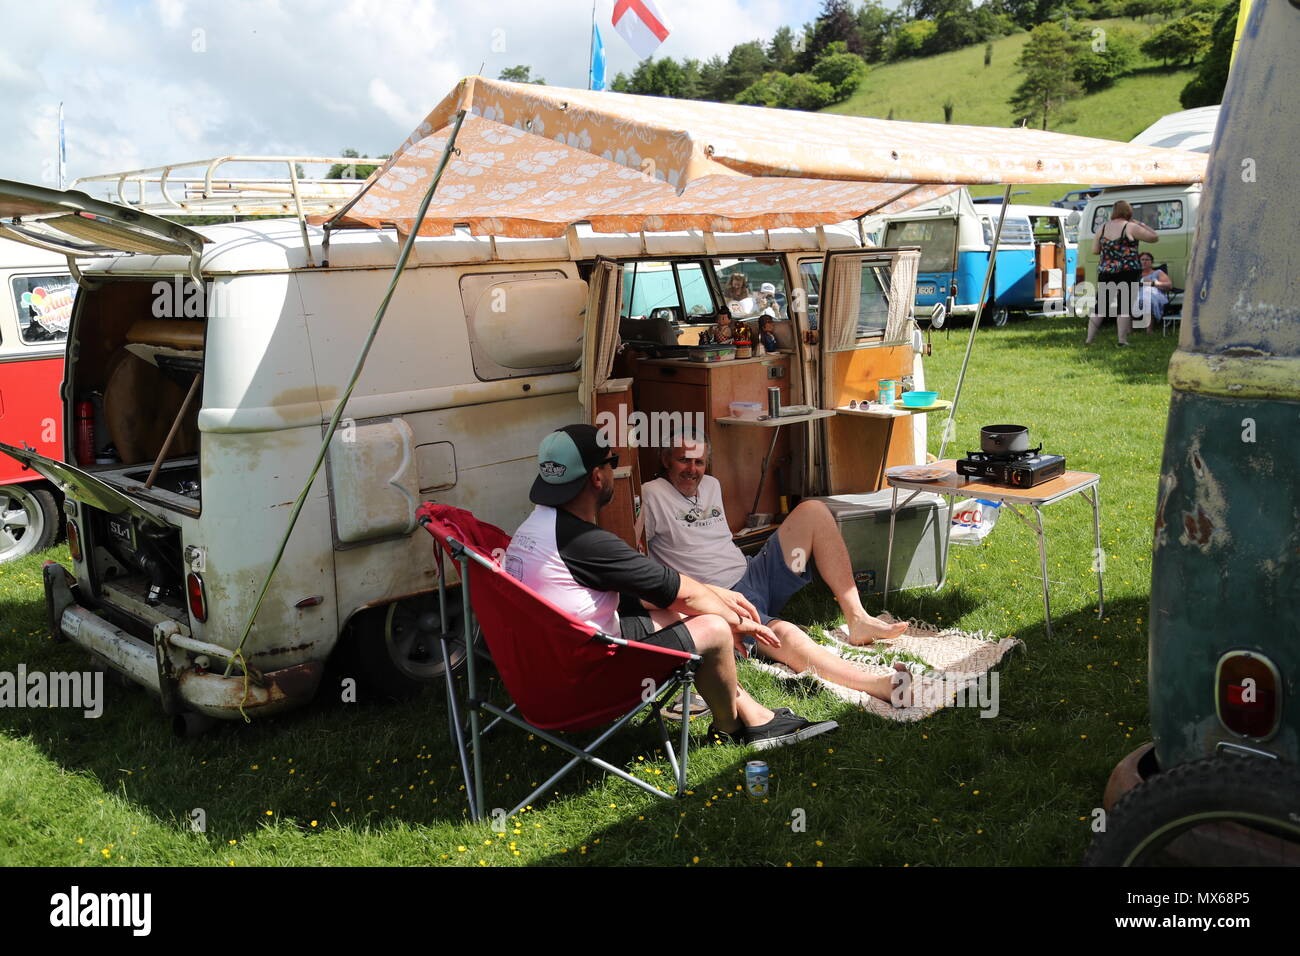 Stonor, Oxfordshire, UK. 3rd Jun, 2018. All types of historic Volkswagen cars and vans were displayed at this years's gathering of their owners. Fans could get close to well-loved vehicles from the German car manufacturer, which created its reputation for durability  and Hippie appeal in the 60s. Idyllic picnic. Credit: Uwe Deffner/Alamy Live News Stock Photo